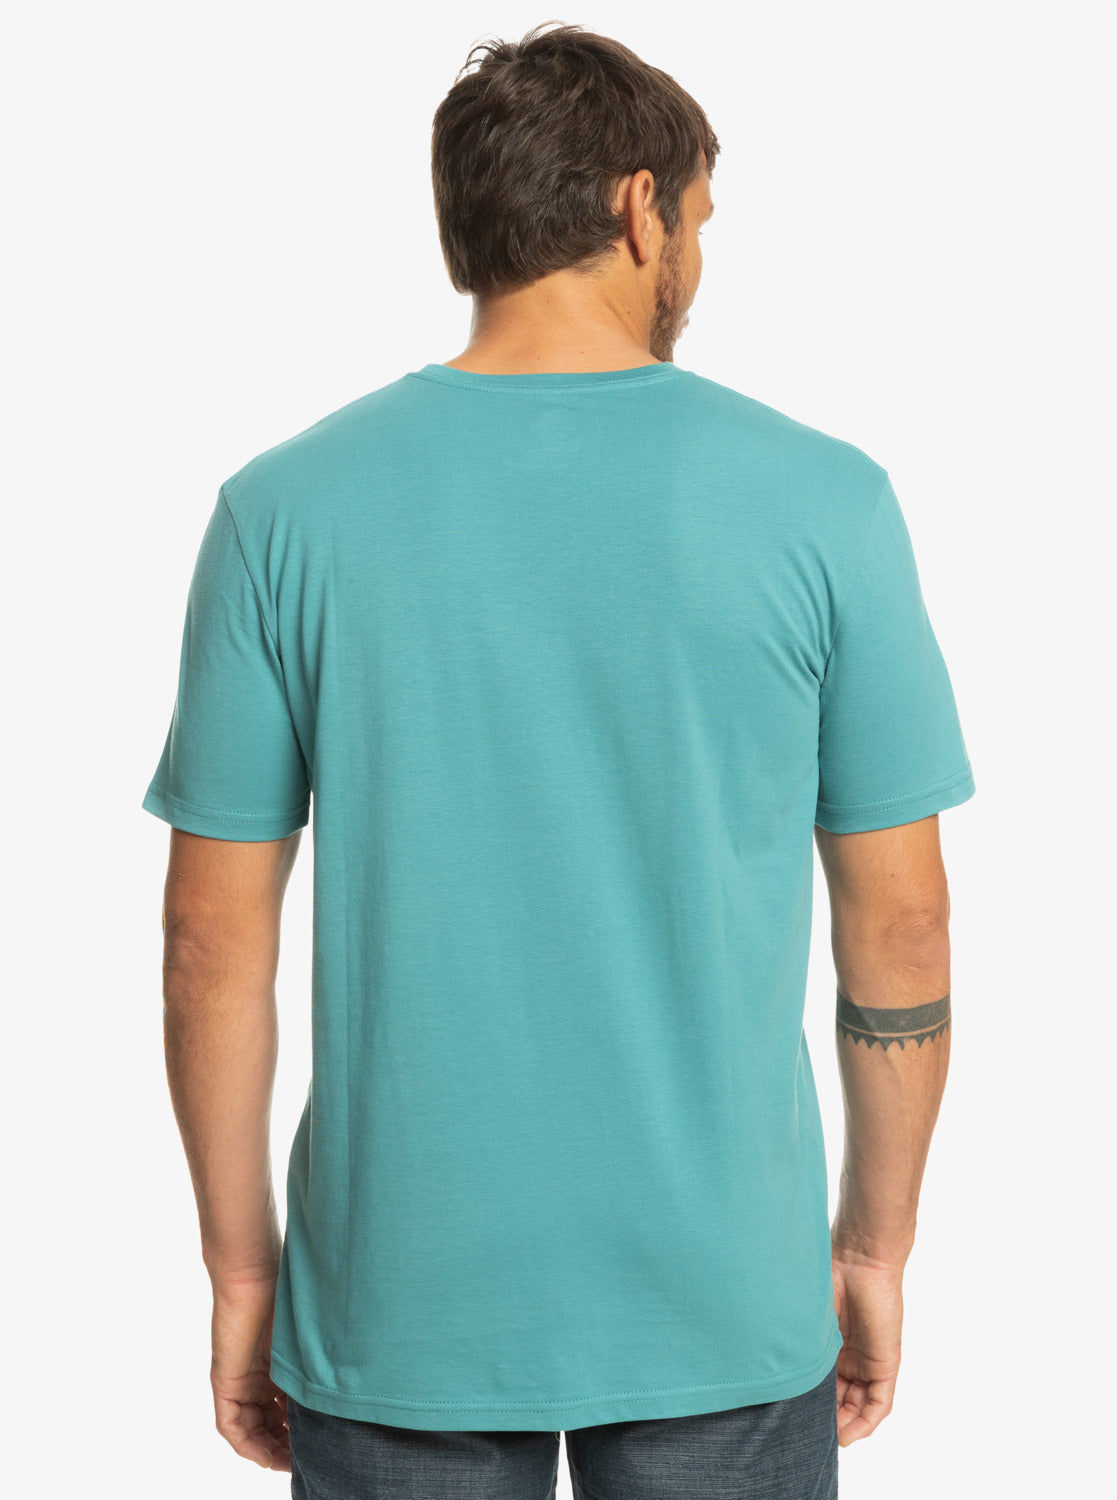 Quiksilver Comp Logo T-Shirt in Brittany Blue